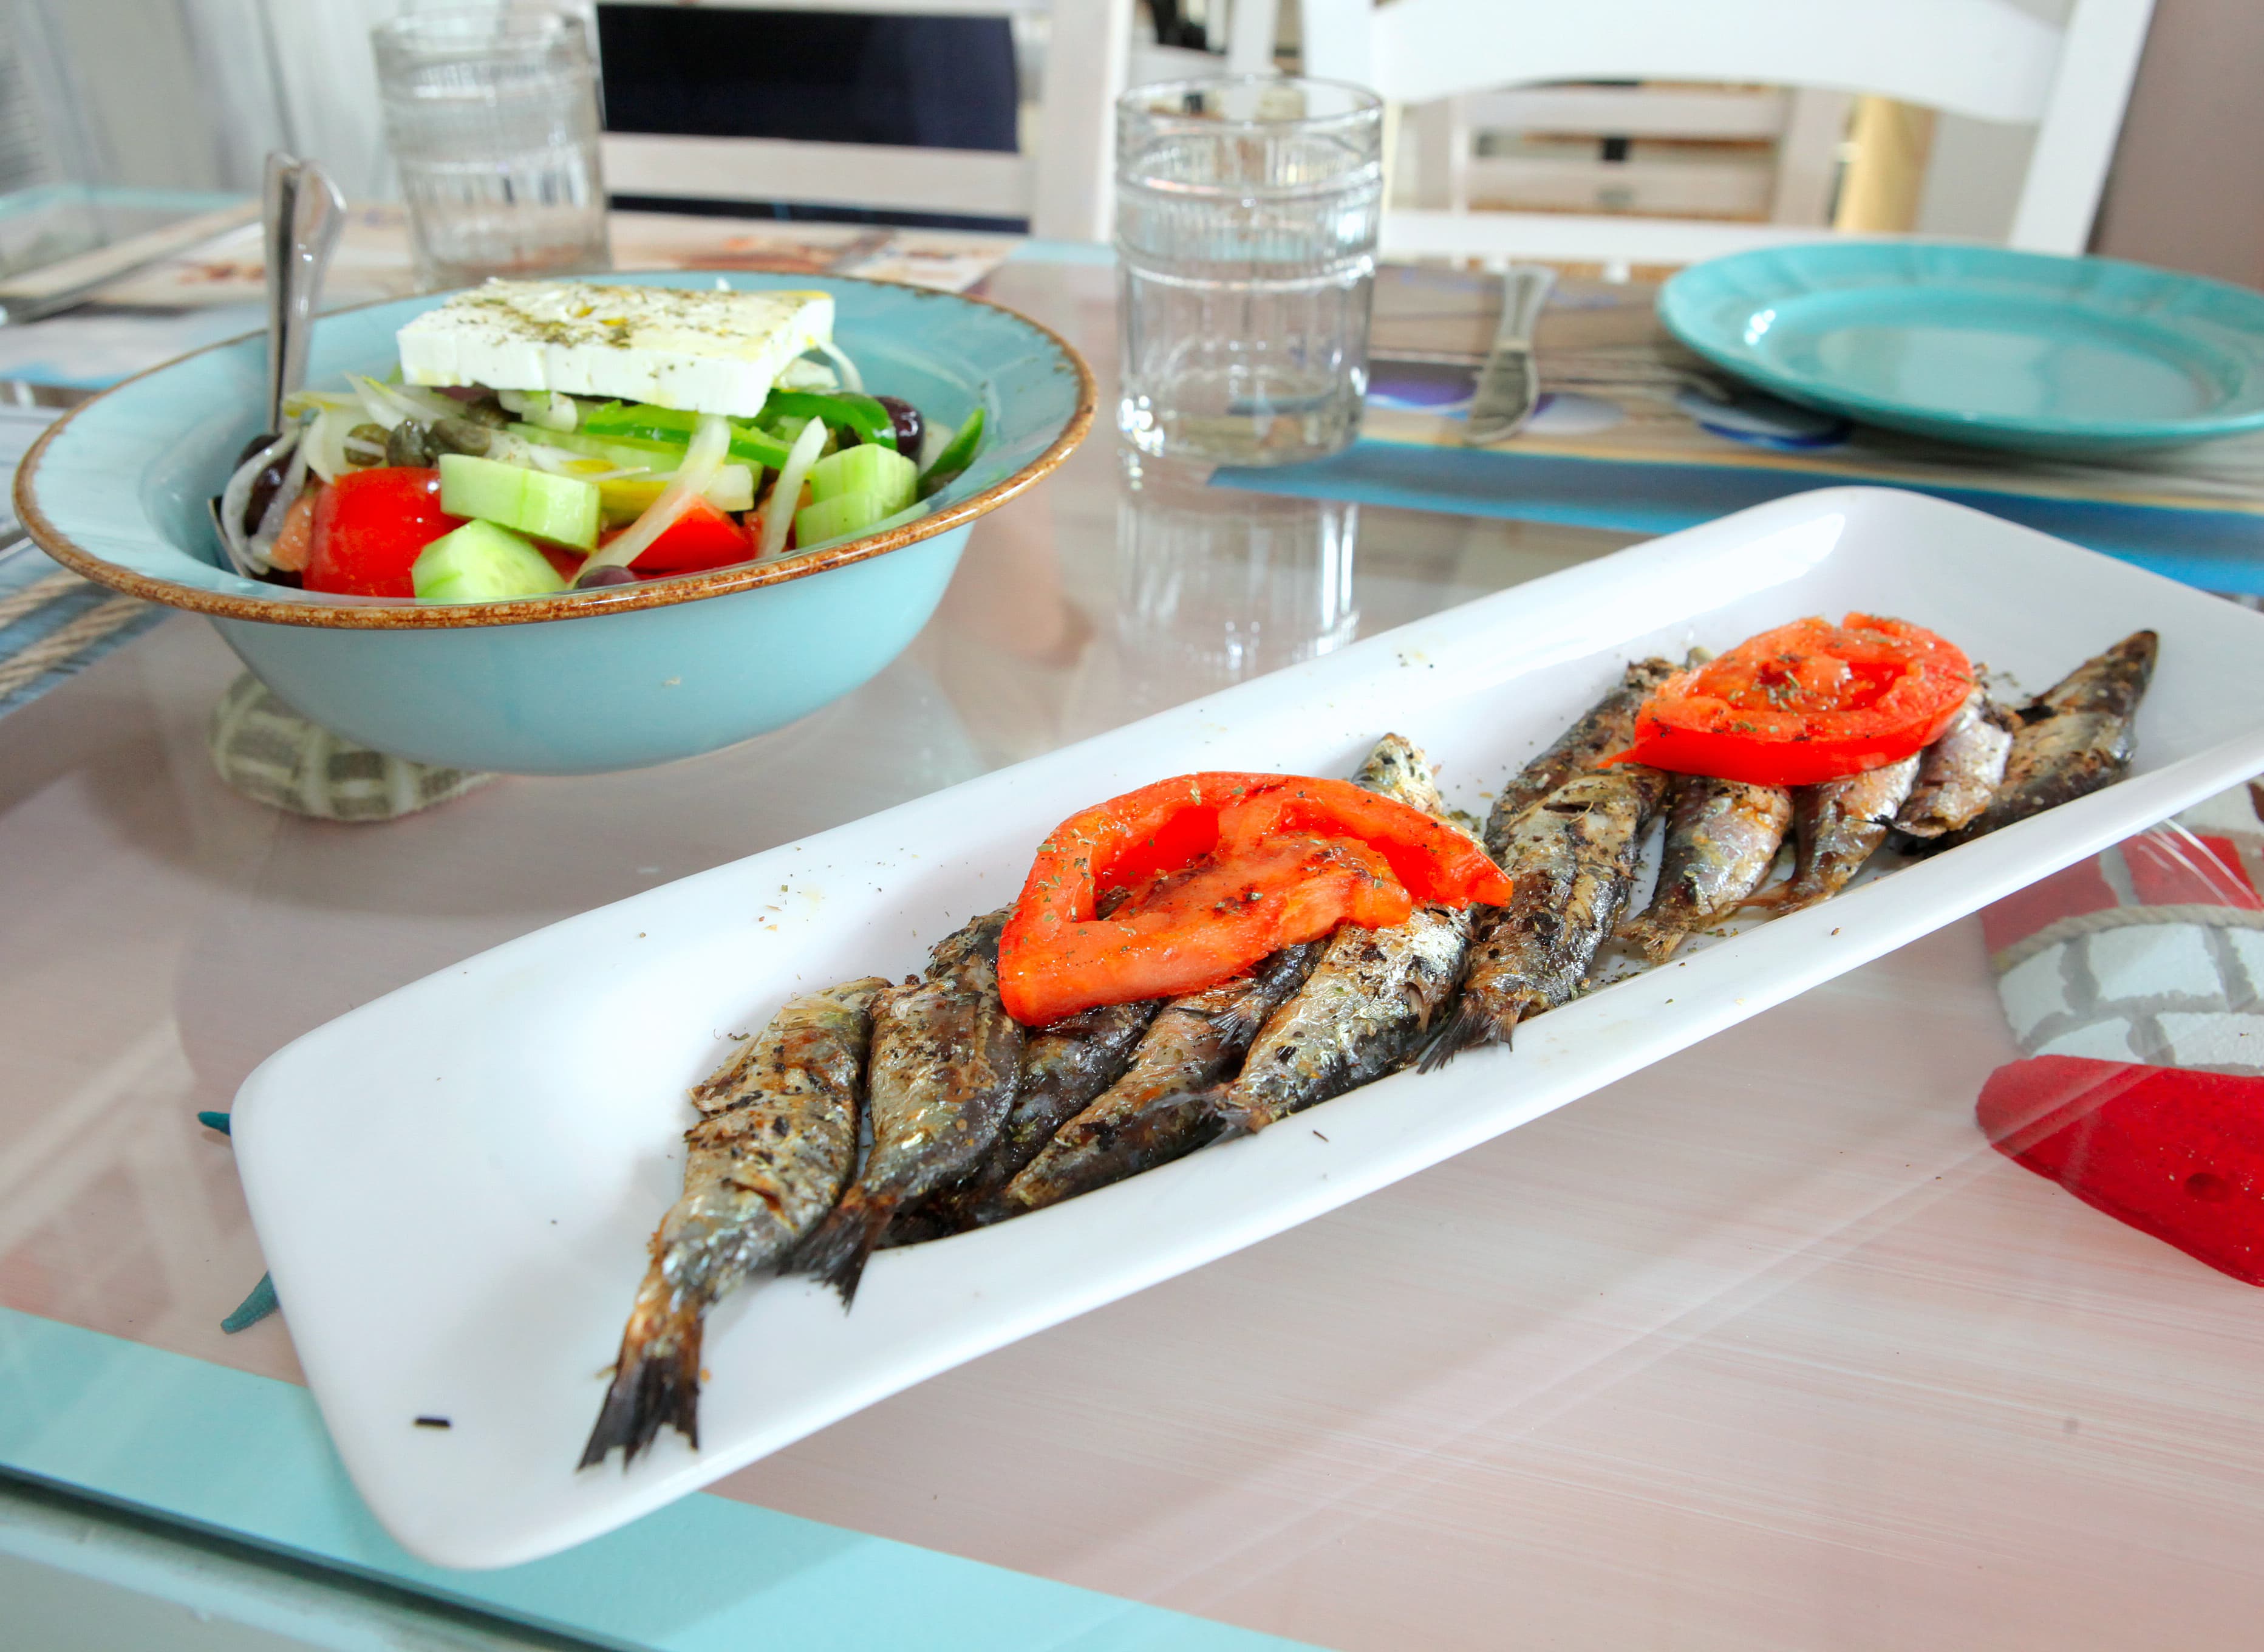 Grilled fish dish and Greek salad on table